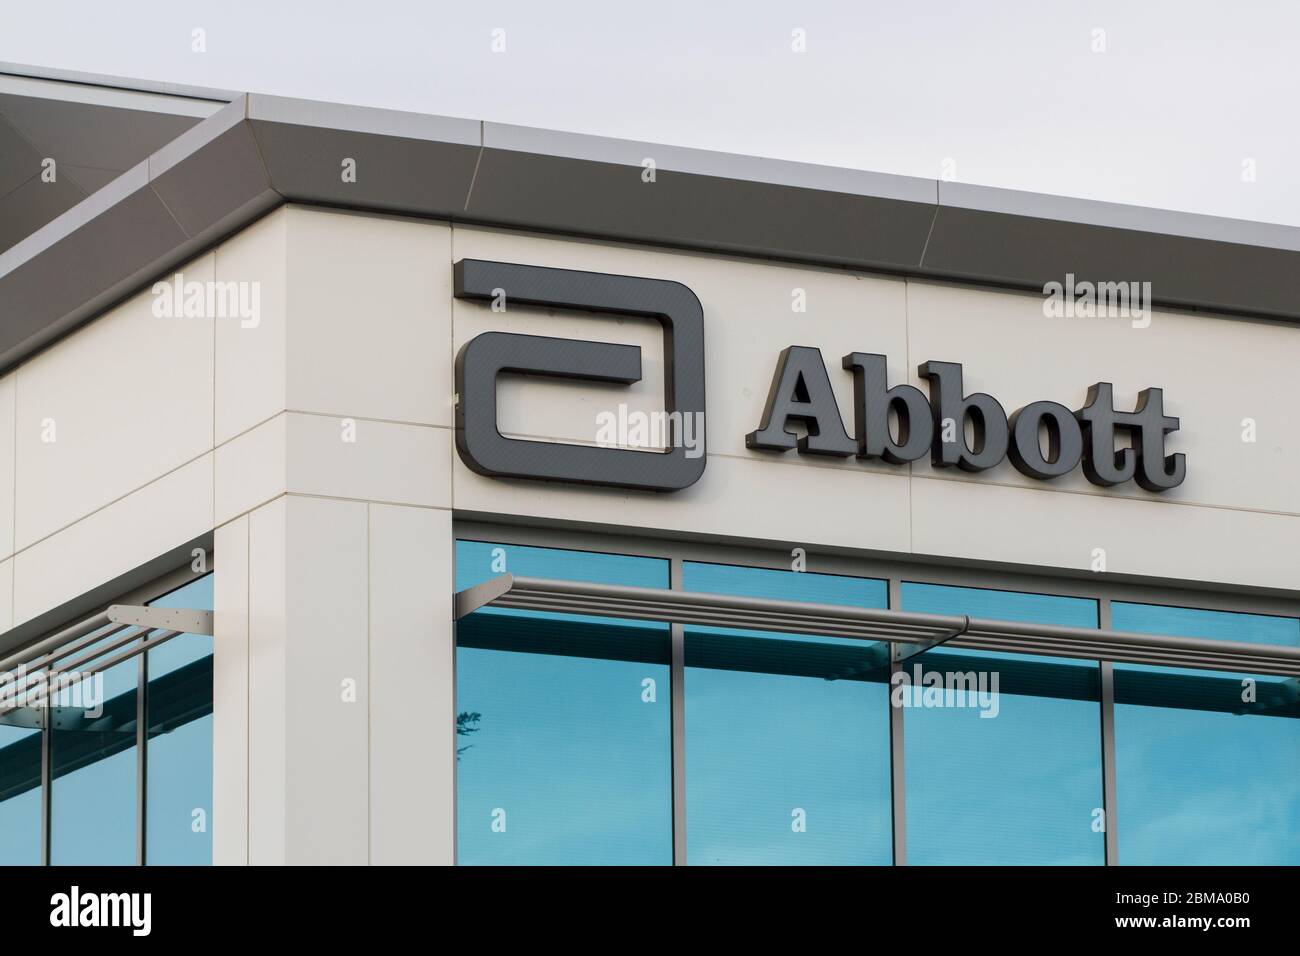 The Abbott logo seen at American medical devices and health care company Abbott Laboratories corporate office in Sunnyvale, California. Stock Photo